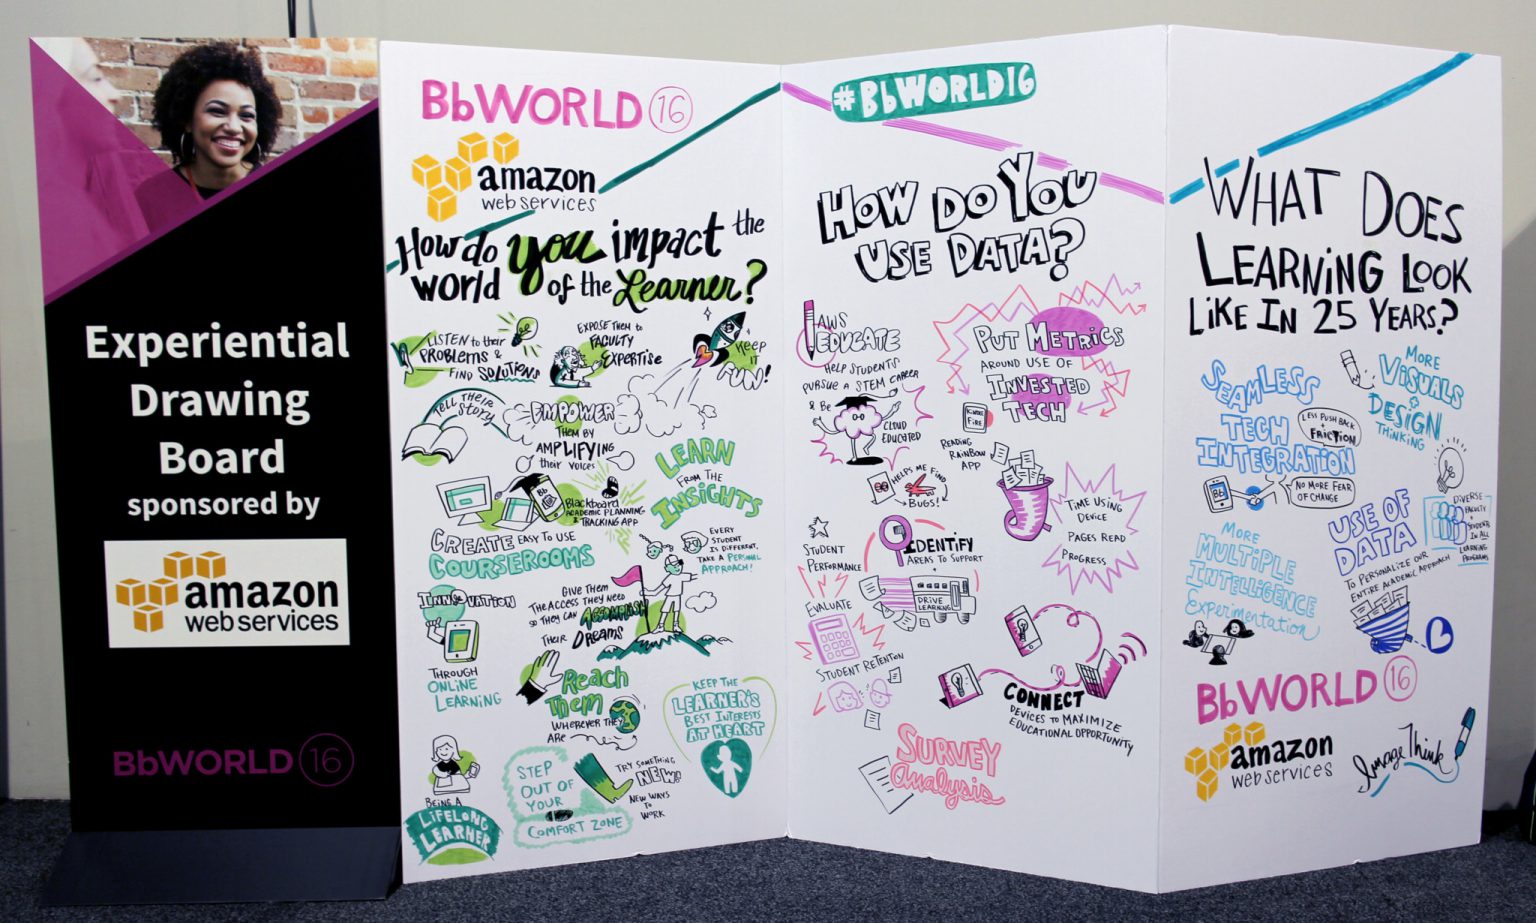 imagethink graphic recording social listening wall at bbworld 2016. Large foam core accordion style wall display of conference engagement. 3 education themed questions and responses from attendees drawn up in fun infographics. The questions are "how do you impact the world of the learner?", "how do you use data?", and "what does learning look like in 25 years?". Learn from the insights, have the learner's best interests at heart, keep it fun, being a lifelong learner, put metrics around ROI, evaluate student retention, more visuals in learning, seamless tech integration are among the answers drawn up.